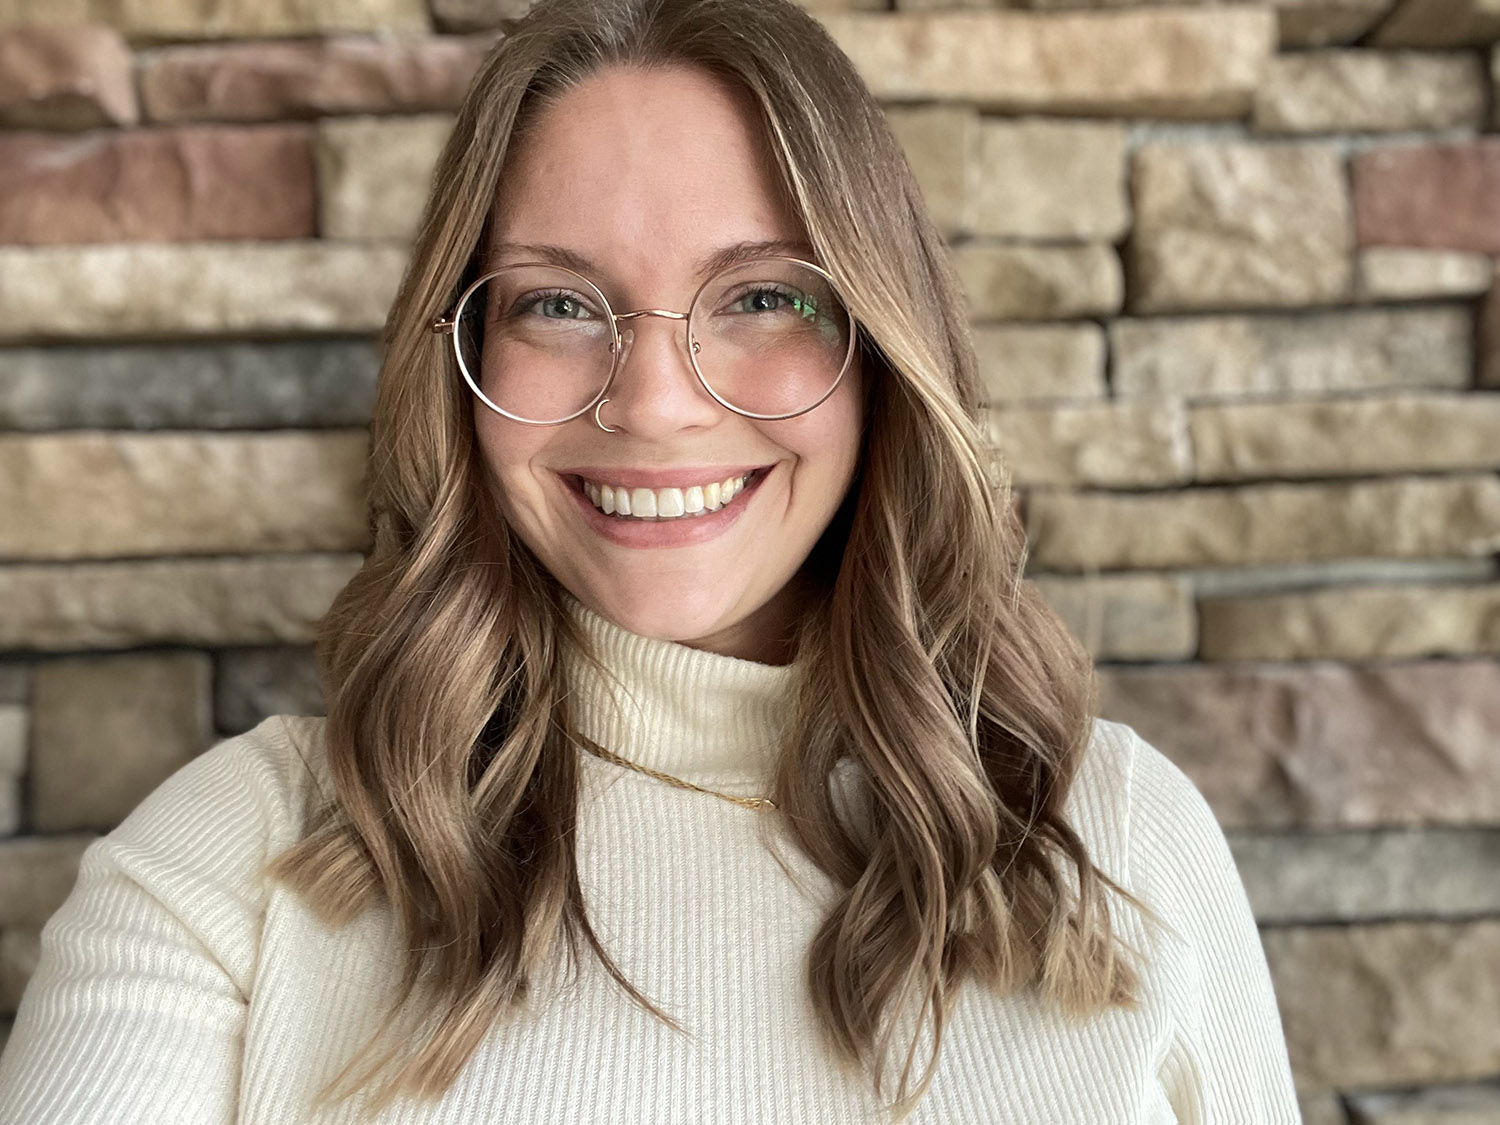 Meet Paige Barstow: Employee Experience Management Apprentice